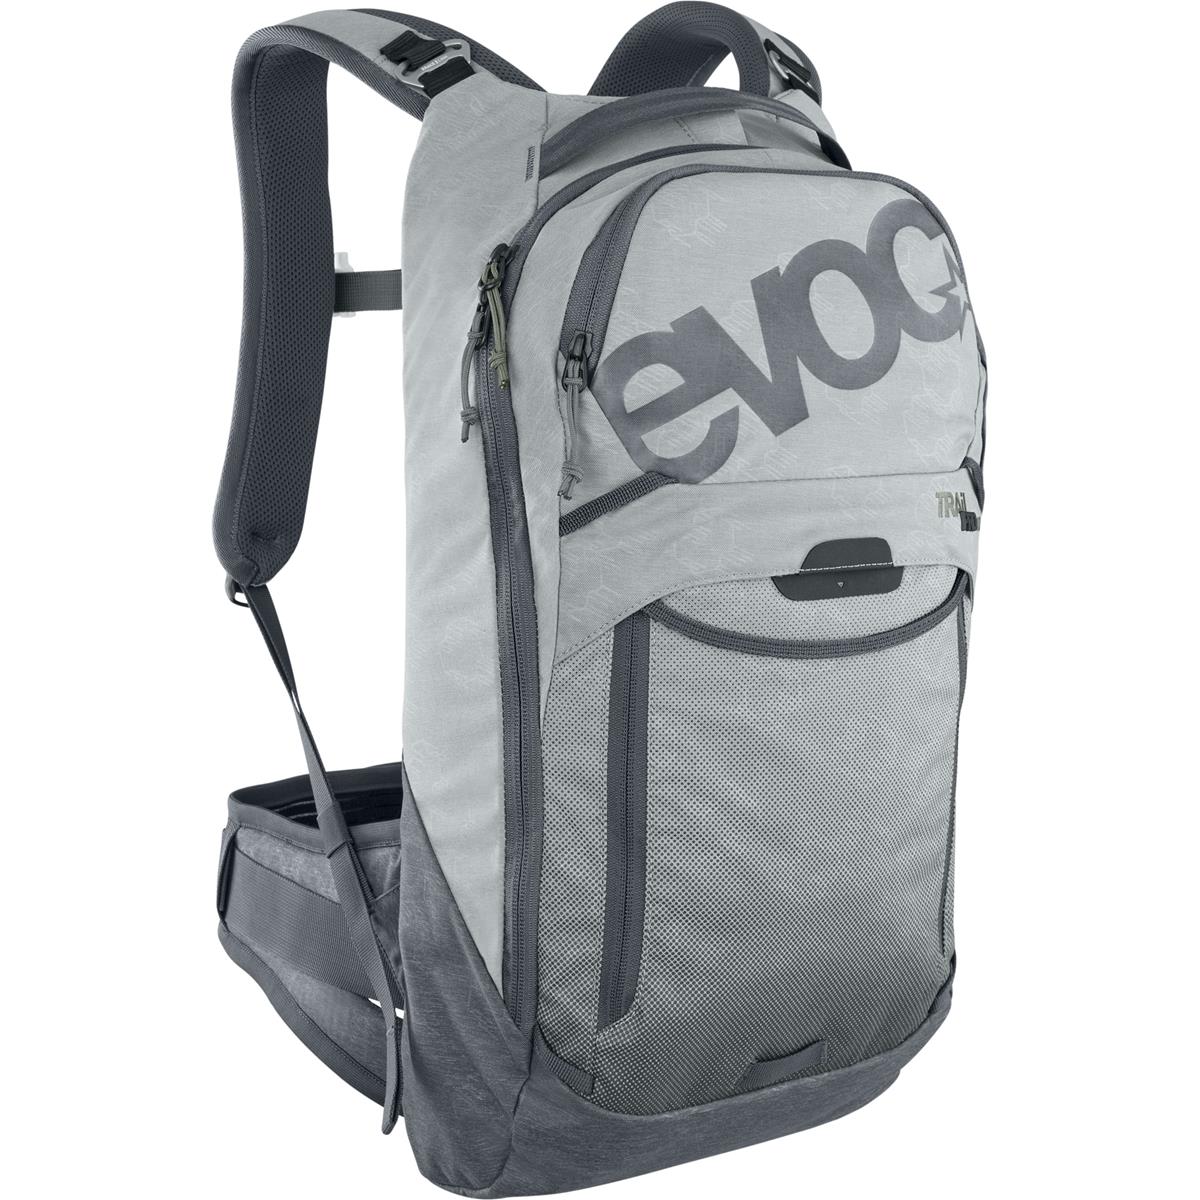 Evoc Protector Backpack Trail Pro 10 10L - Stone/Carbon Gray